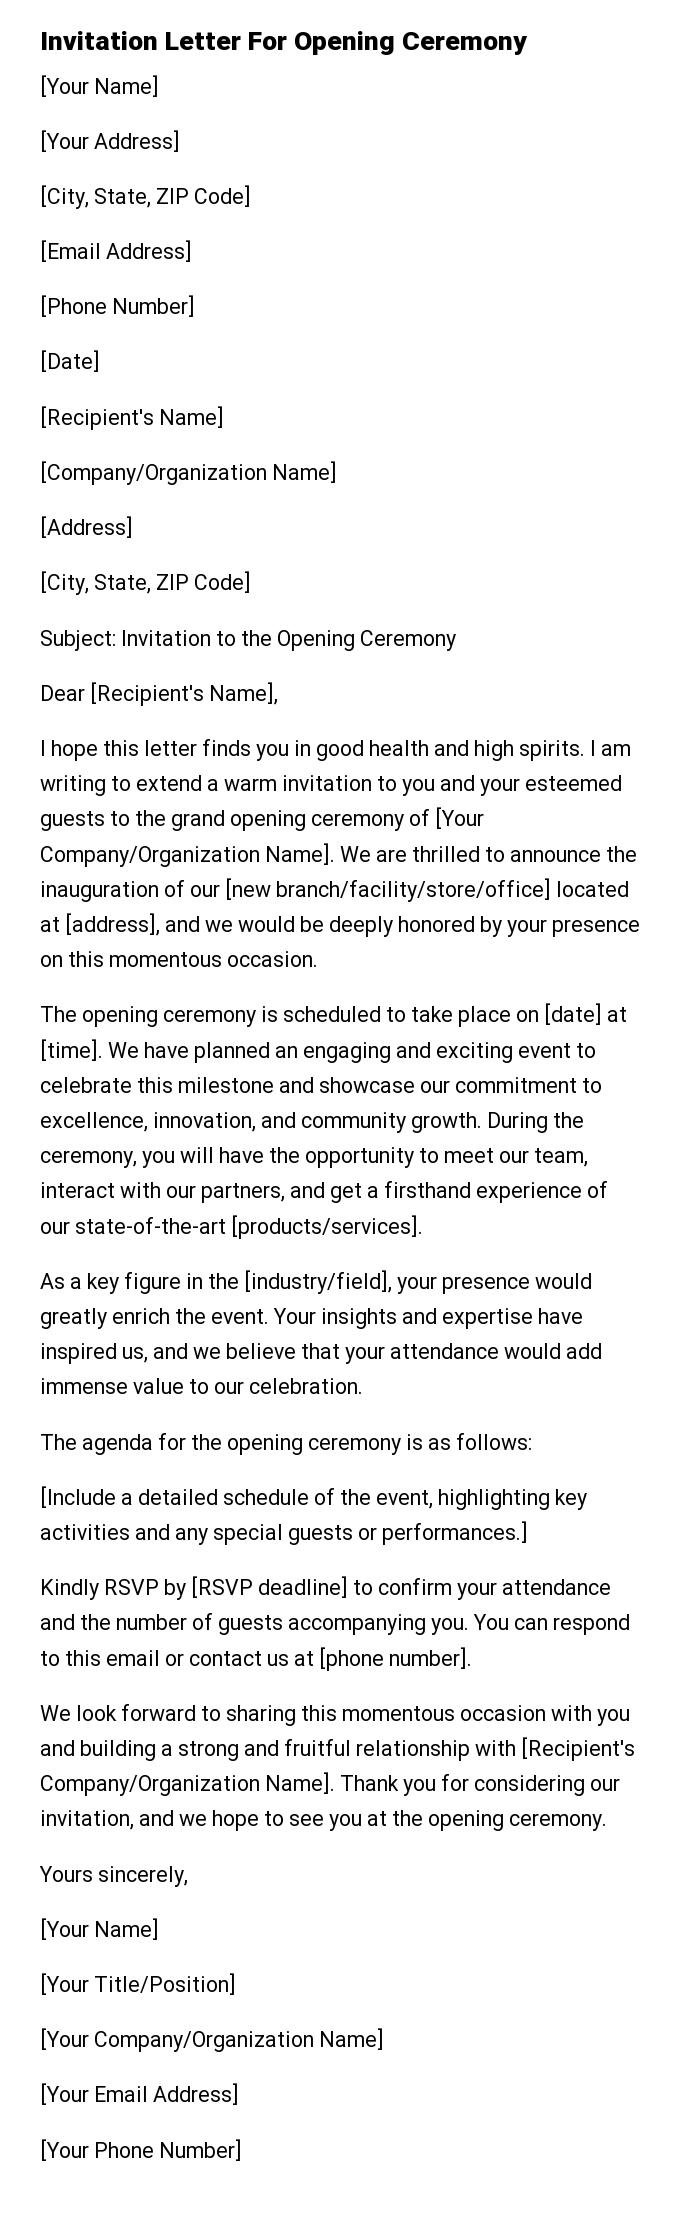 Invitation Letter For Opening Ceremony